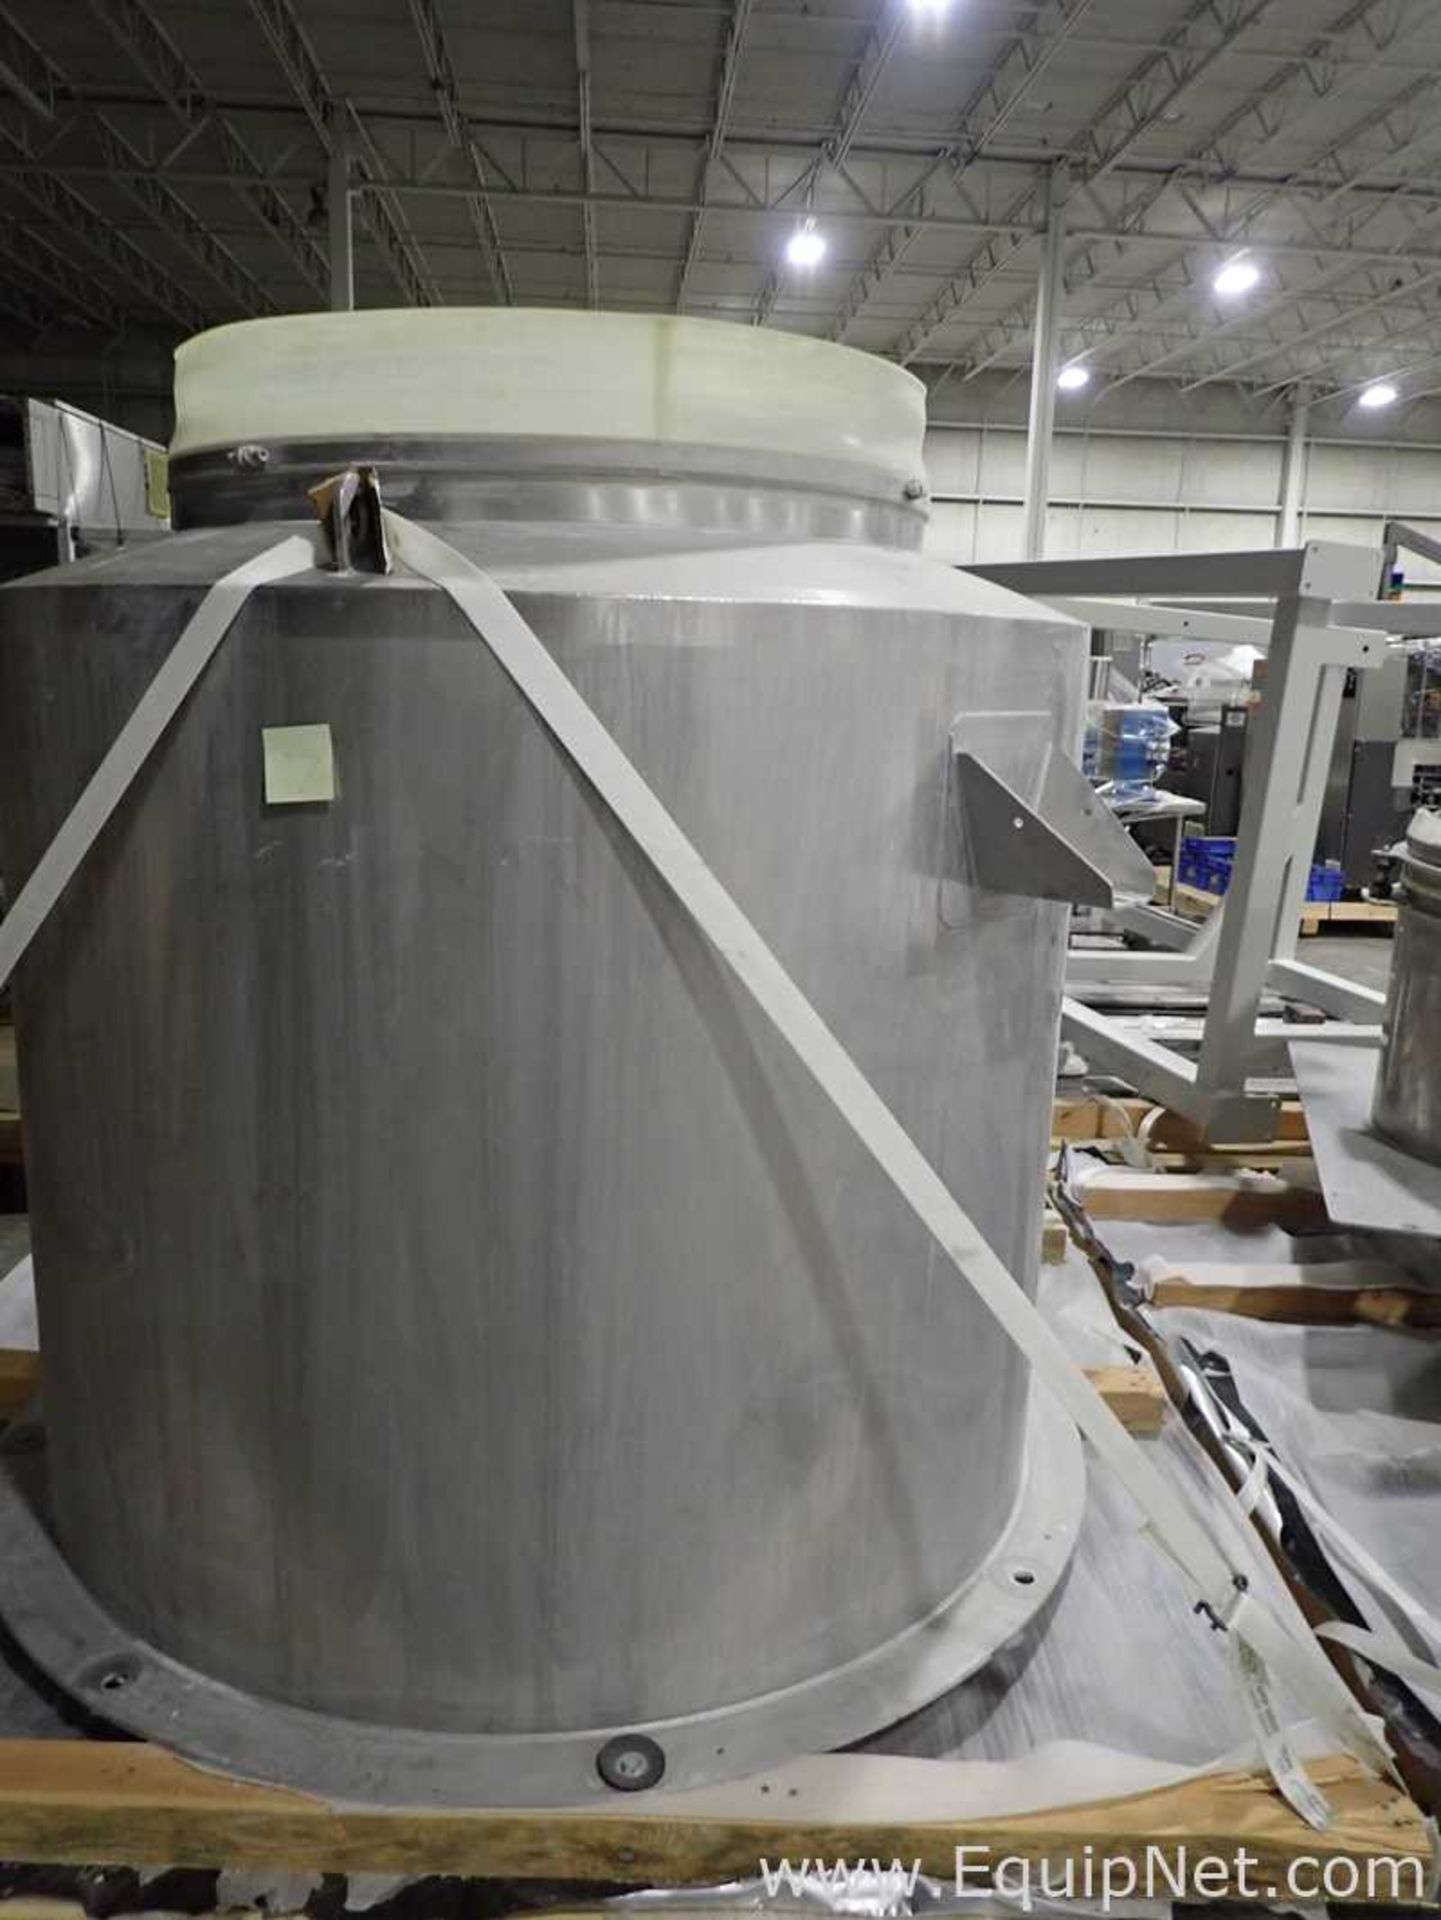 AZO Raw Material Production Equipment - Image 18 of 21